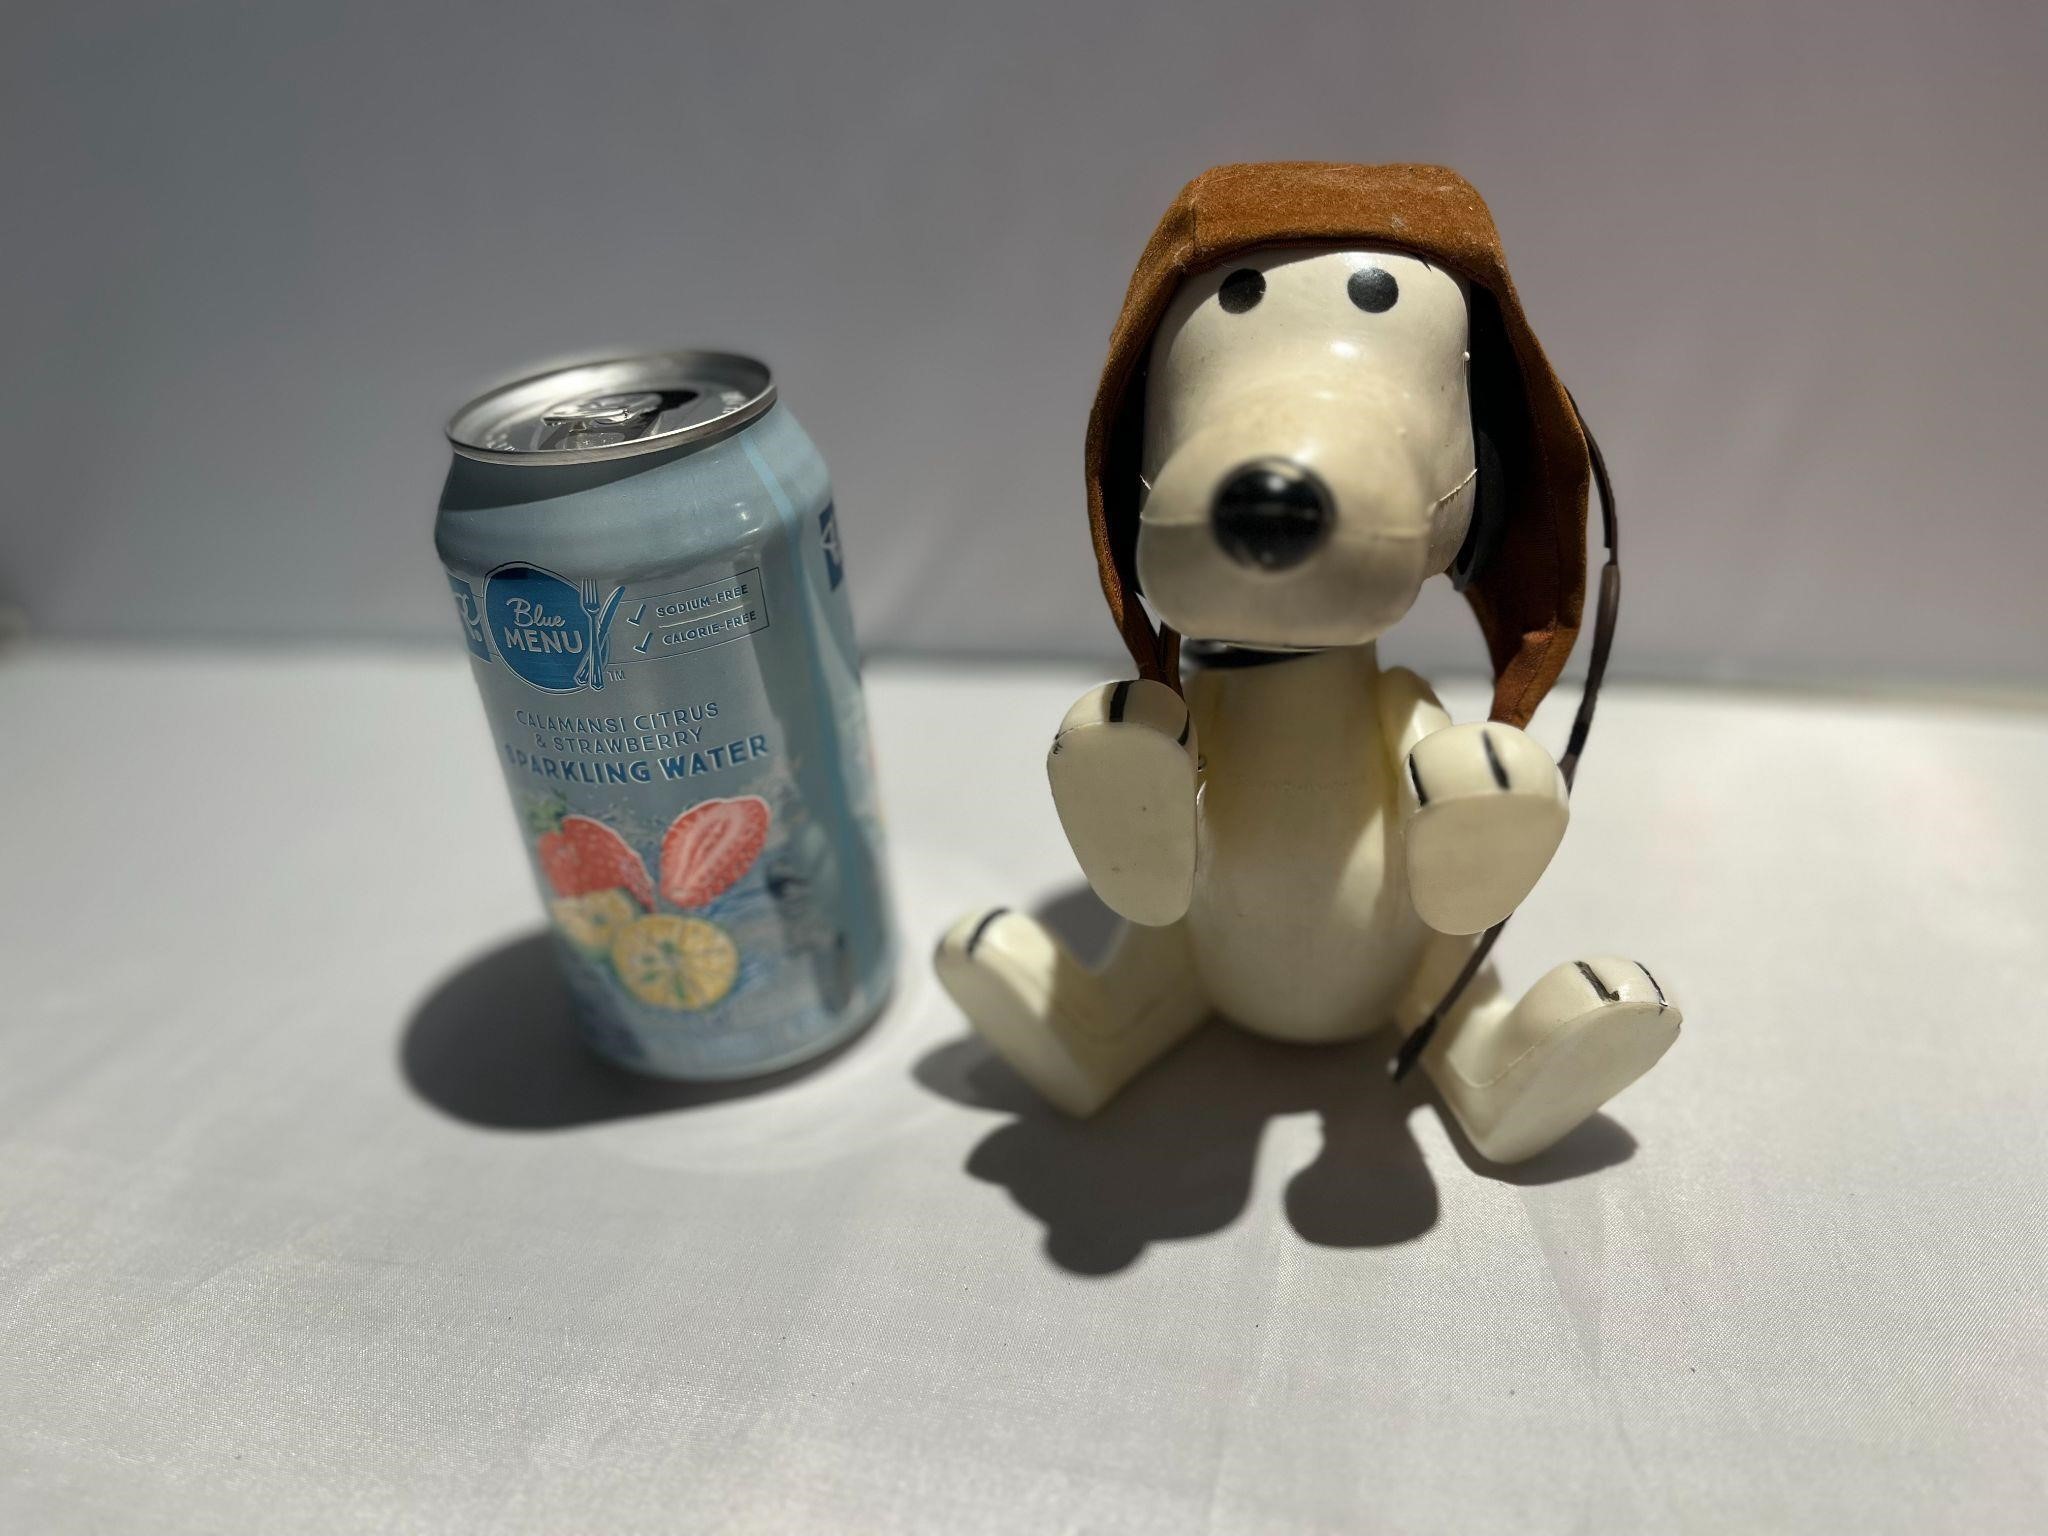 Snoopy Vintage Action Figure, Rare